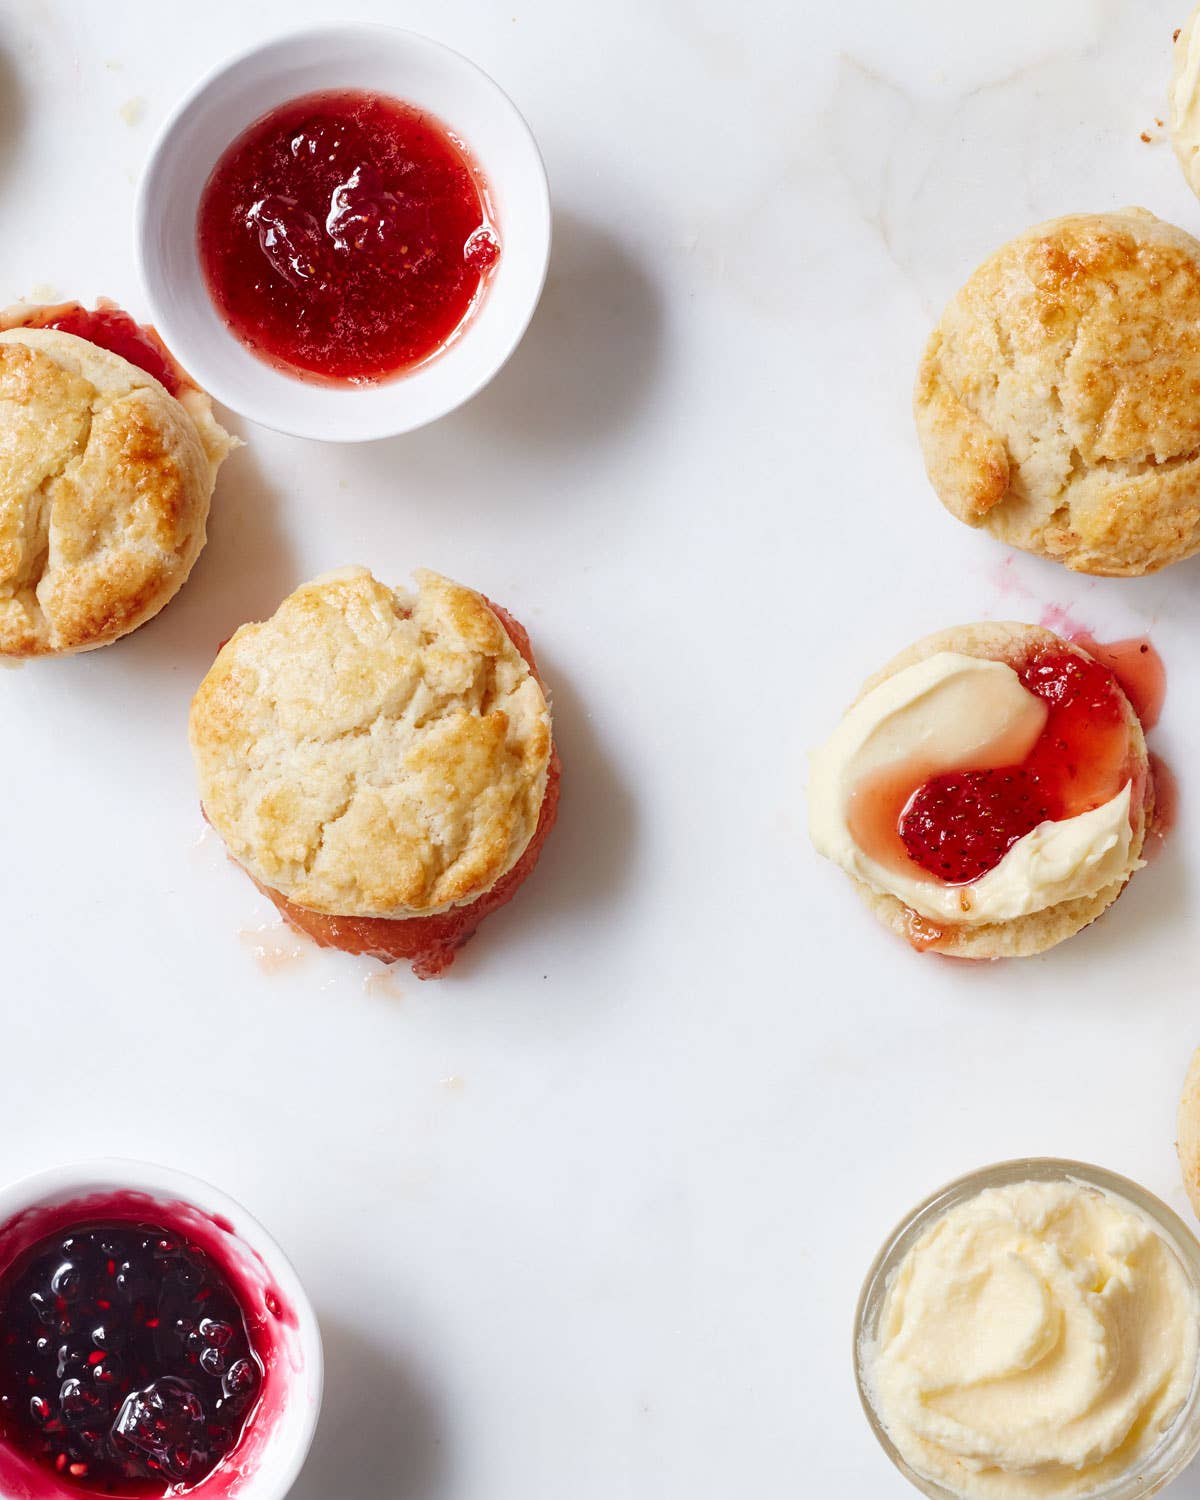 An American-Inspired Scone on English Soil